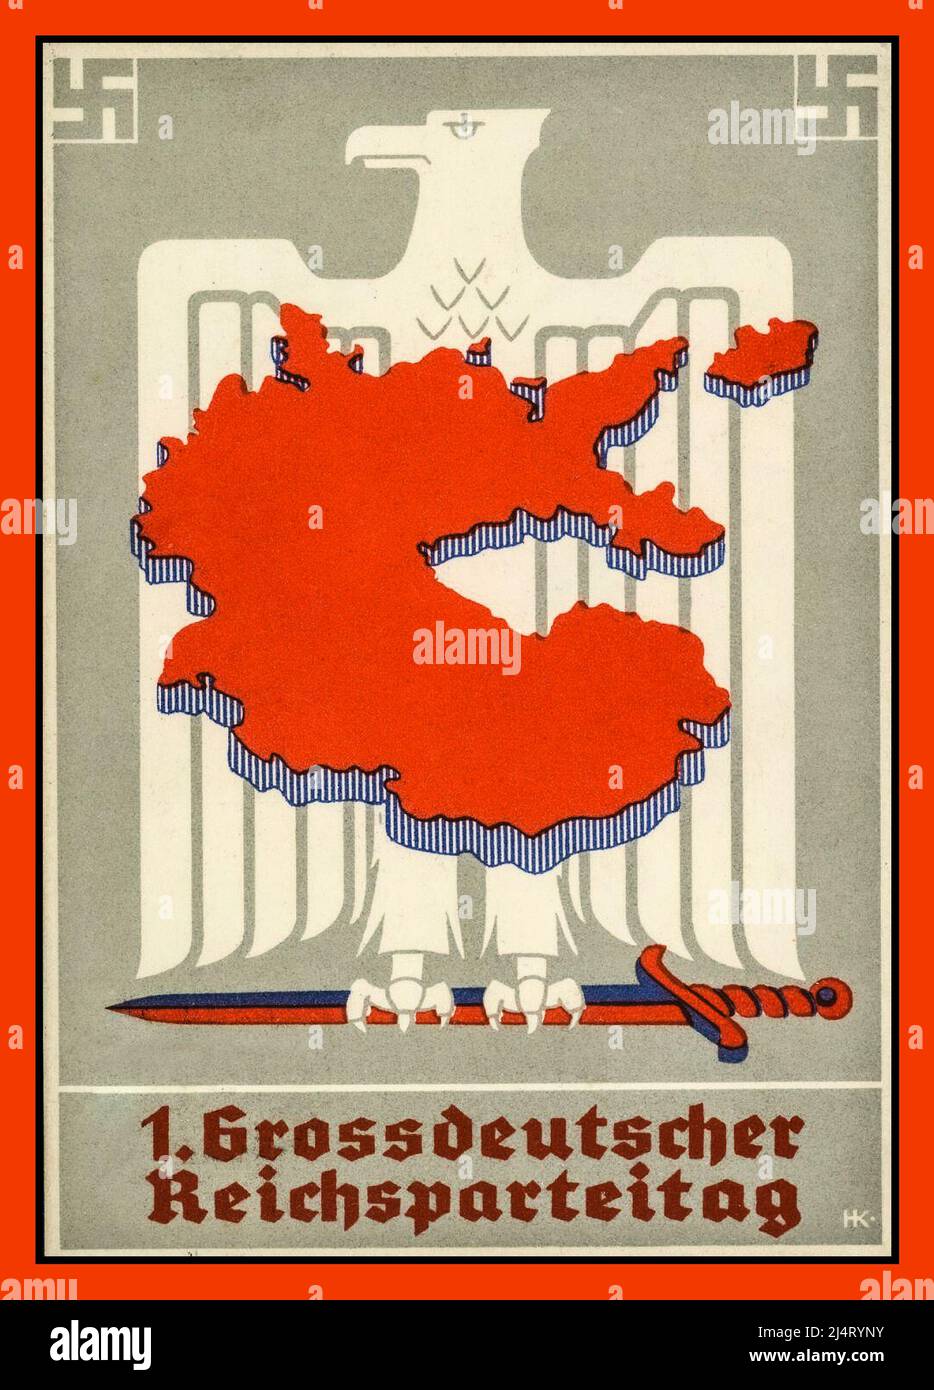 1930s Nazi Germany Propaganda Poster Card for Greater Germany ,Reichsparteitag ( Reich Party Congress) Grossdeutscher Reichsparteitag with German Eagle Swastika symbols and a map of Nazi Germany Stock Photo